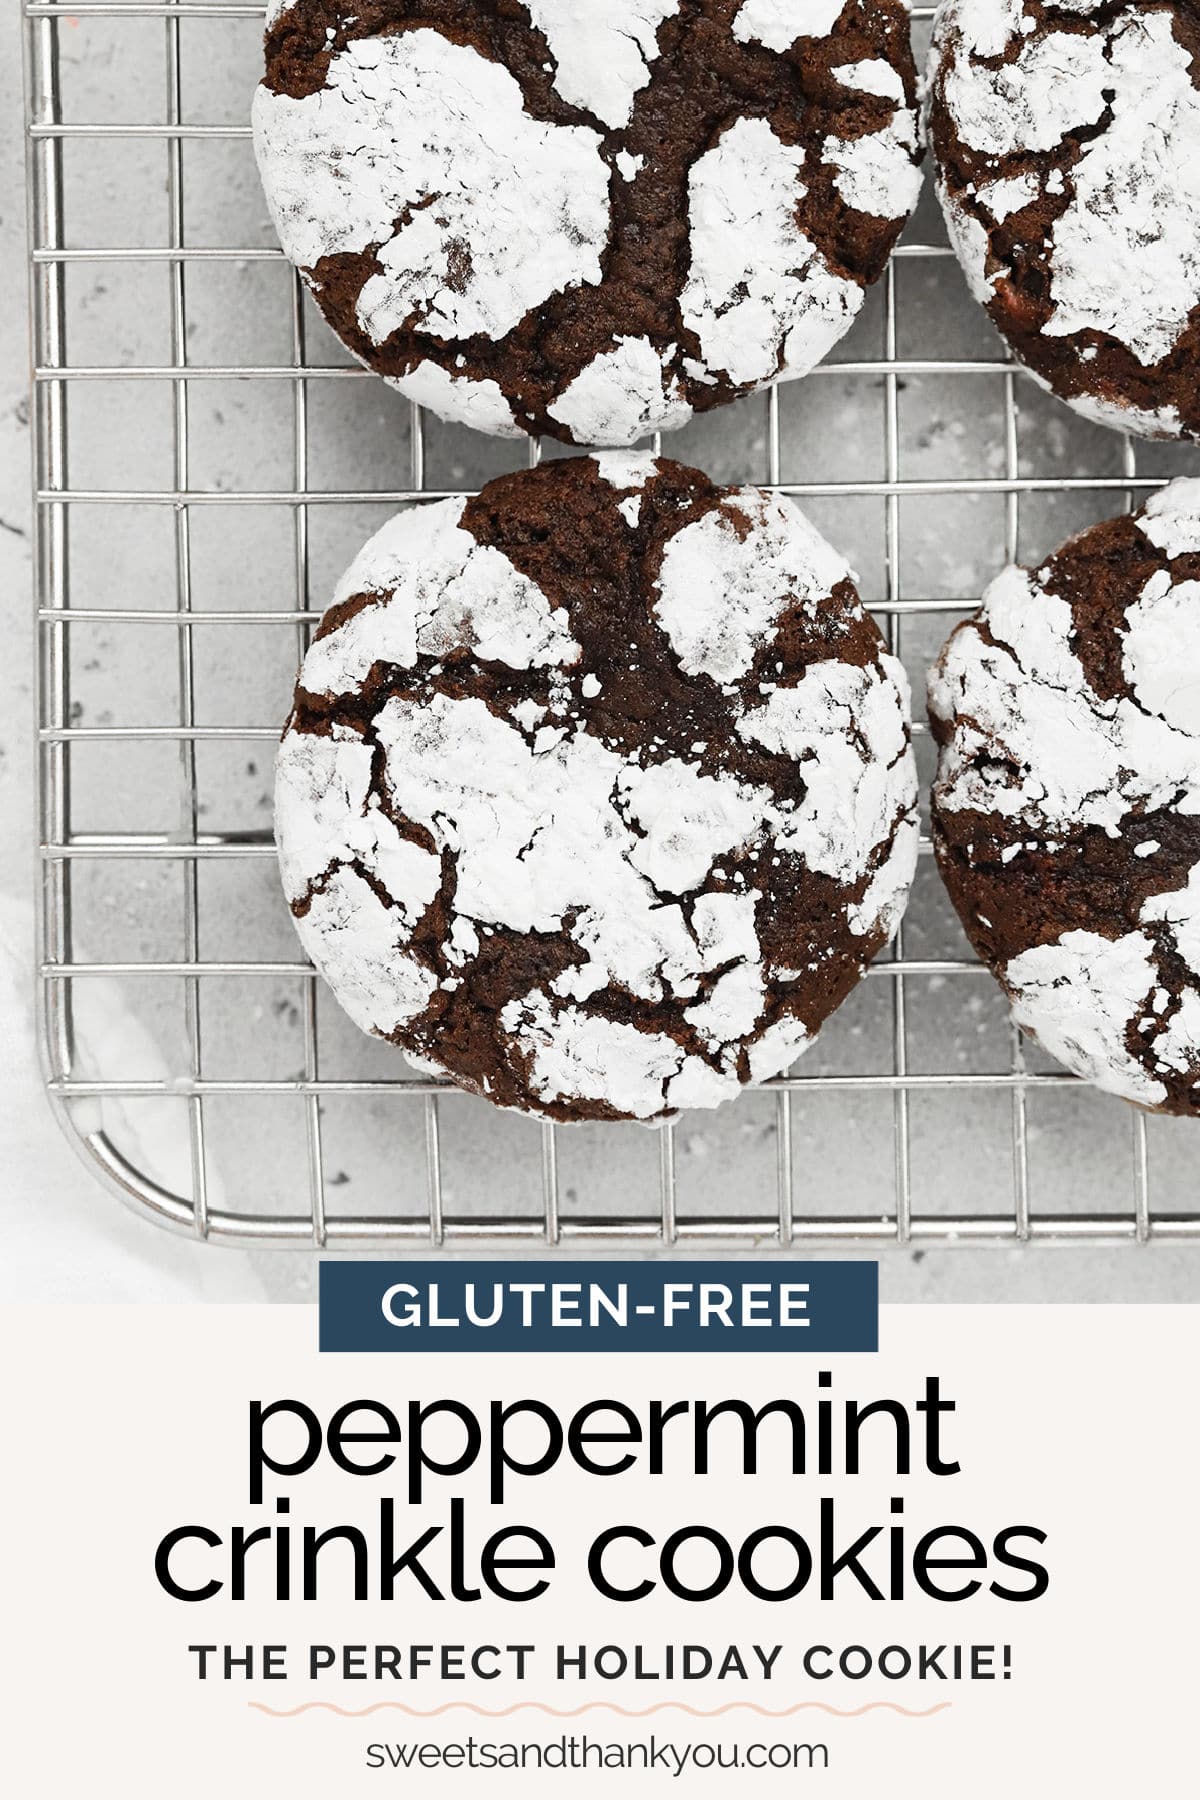 Gluten-Free Peppermint Chocolate Crinkle Cookies - Take best gluten-free chocolate crinkle cookies & give them a minty twist for the holidays! // gluten-free holiday cookies // gluten free peppermint crinkles // gluten free crinkles // gluten-free chocolate cookies 